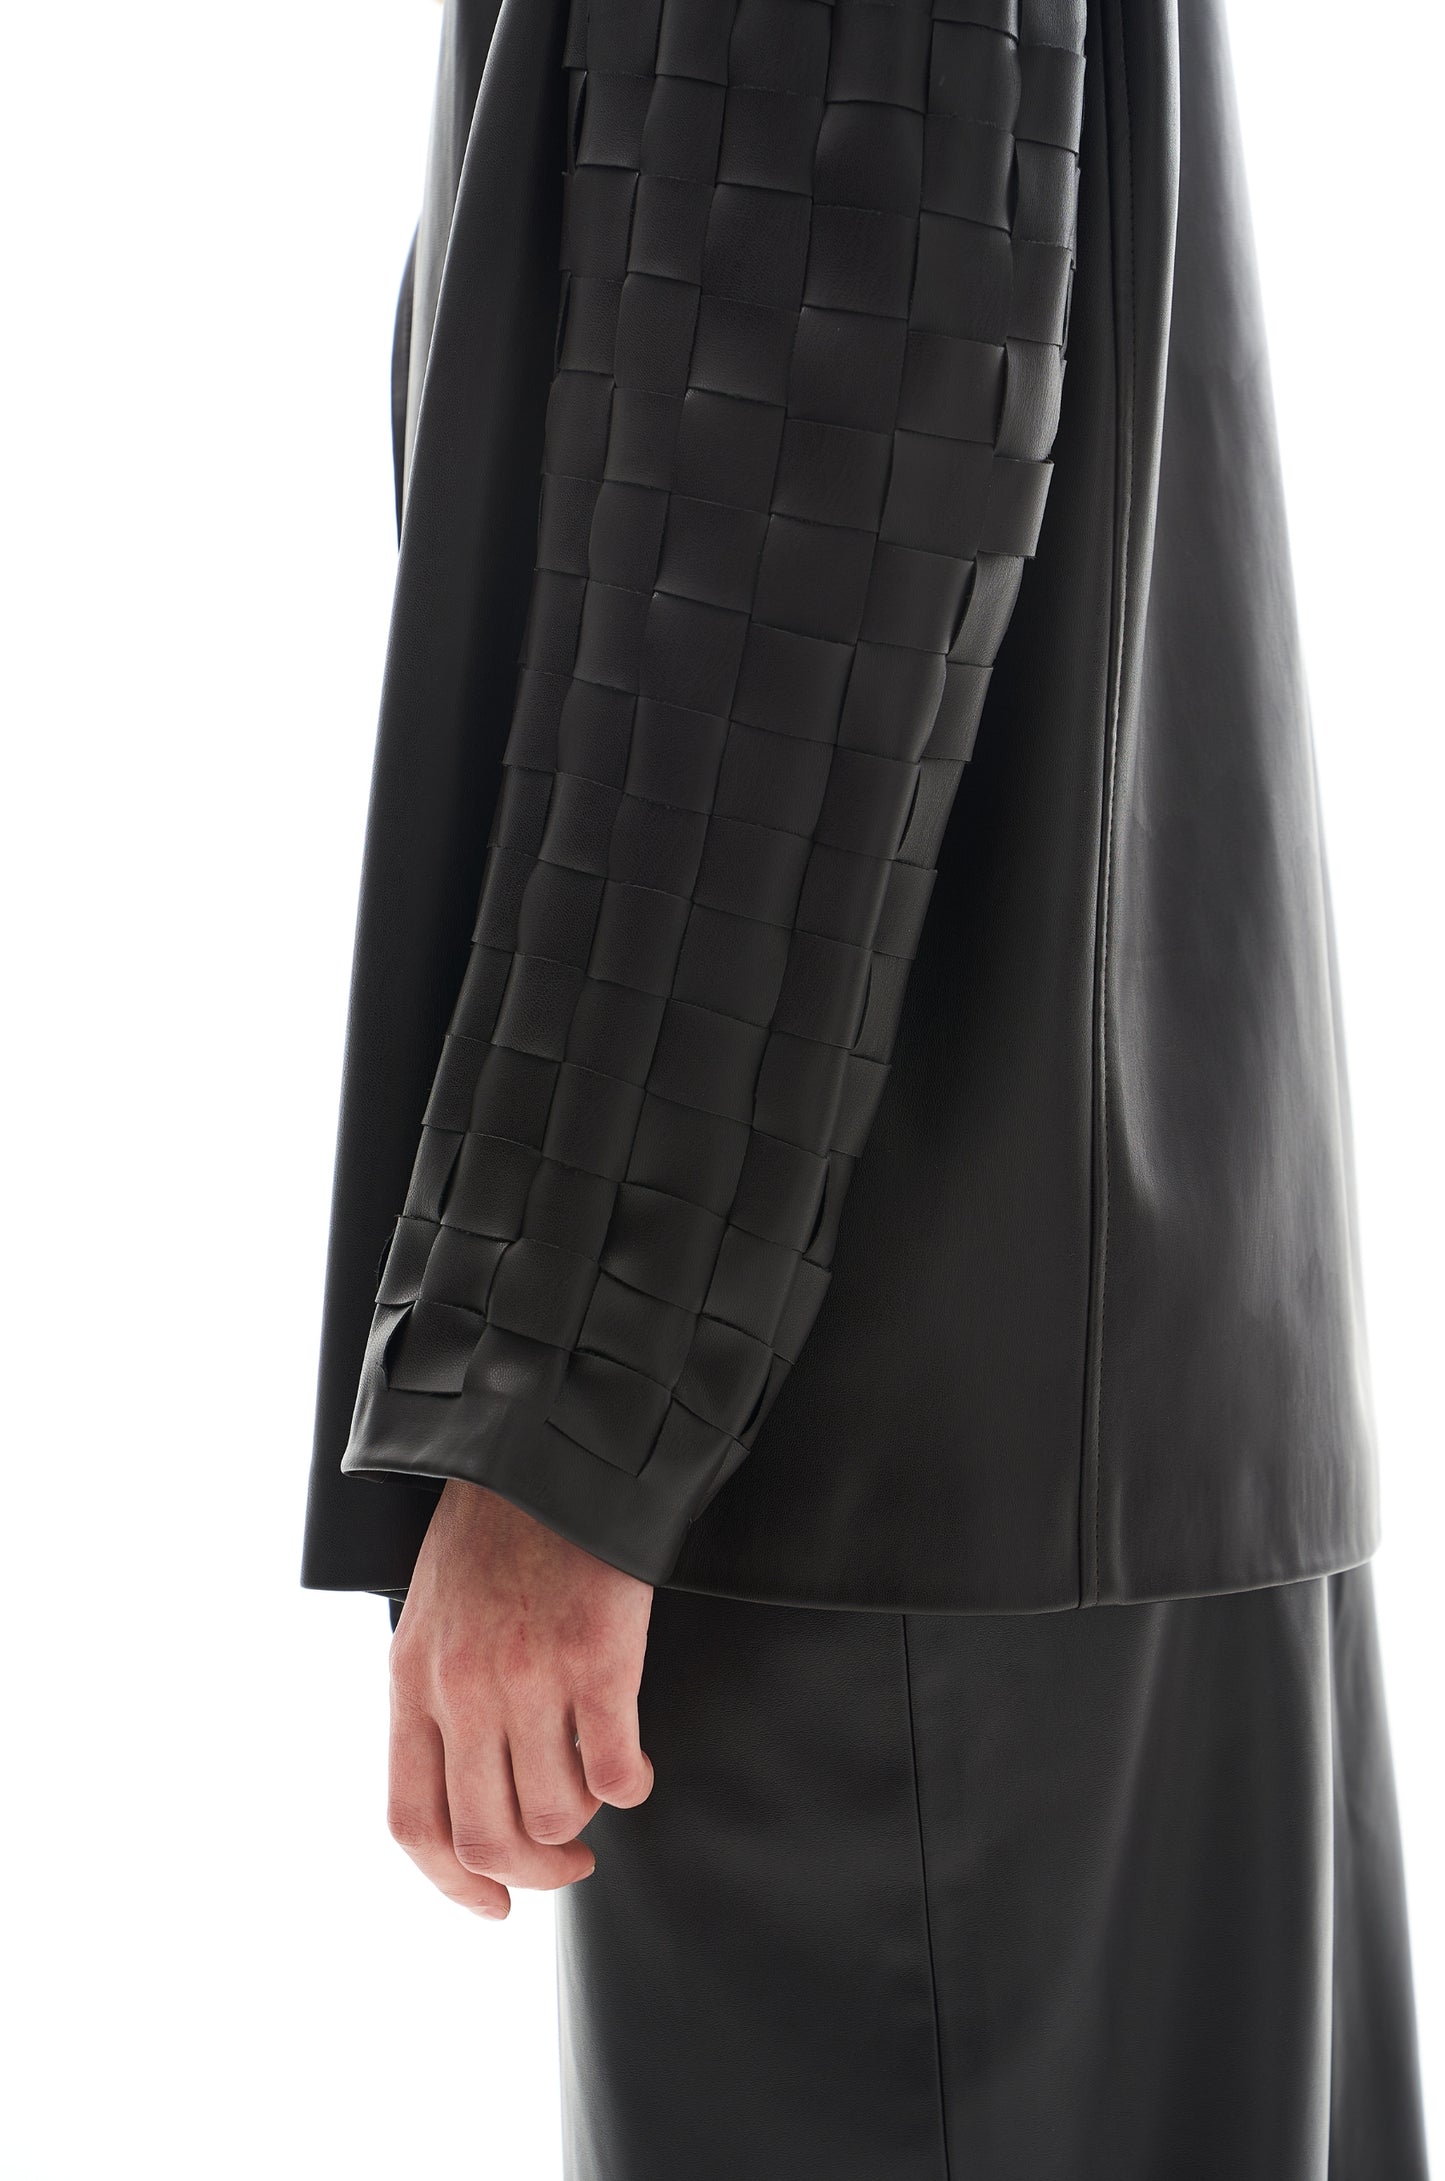 Black eco leather boxy jacket with weaving detail for women by Holocene